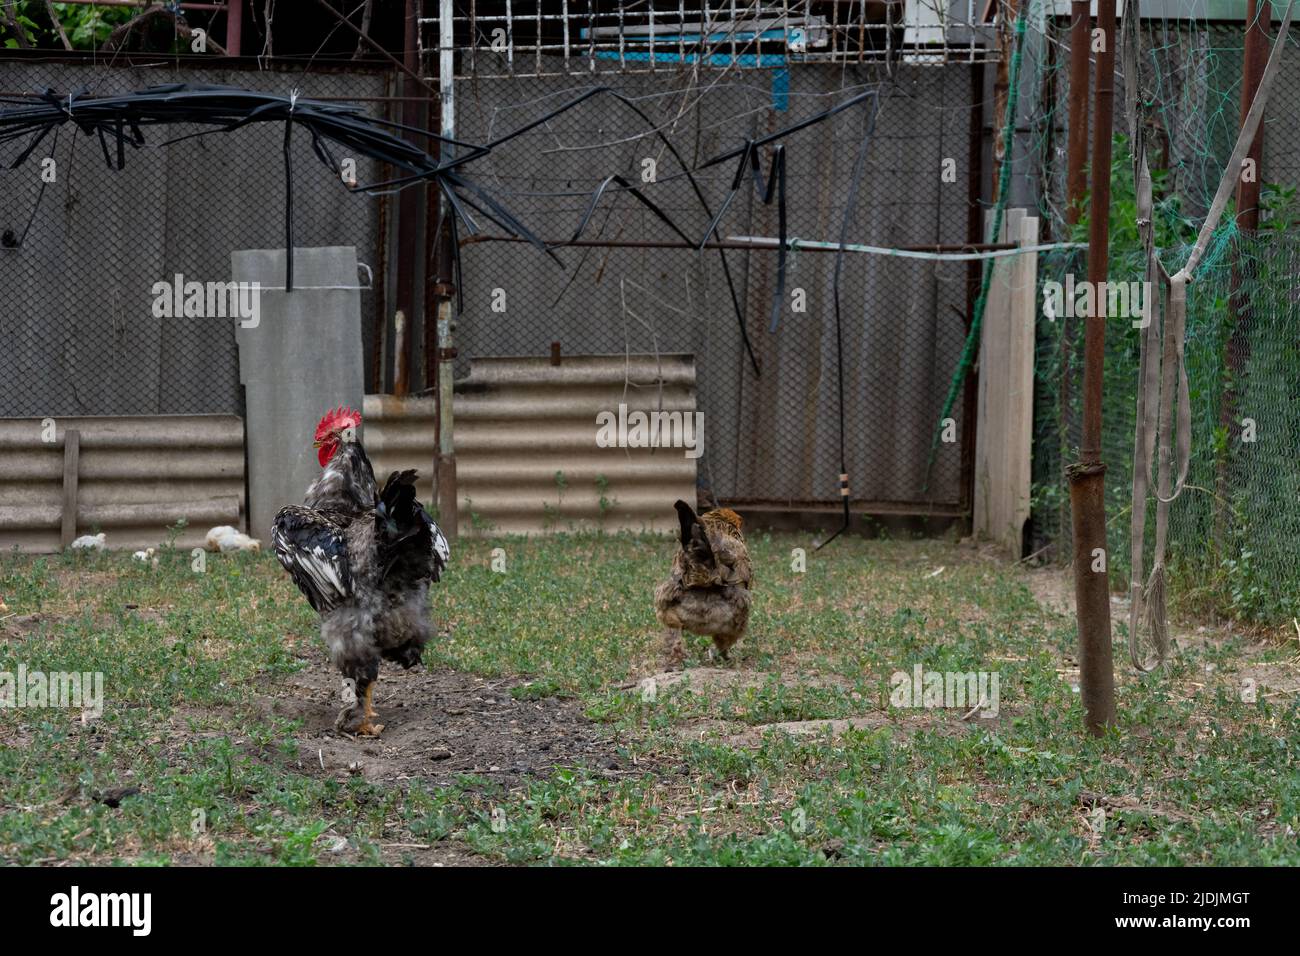 Rooster and chicken. A beautiful rooster importantly walks behind a brown hen demonstrating his splendor and desire to mate Stock Photo